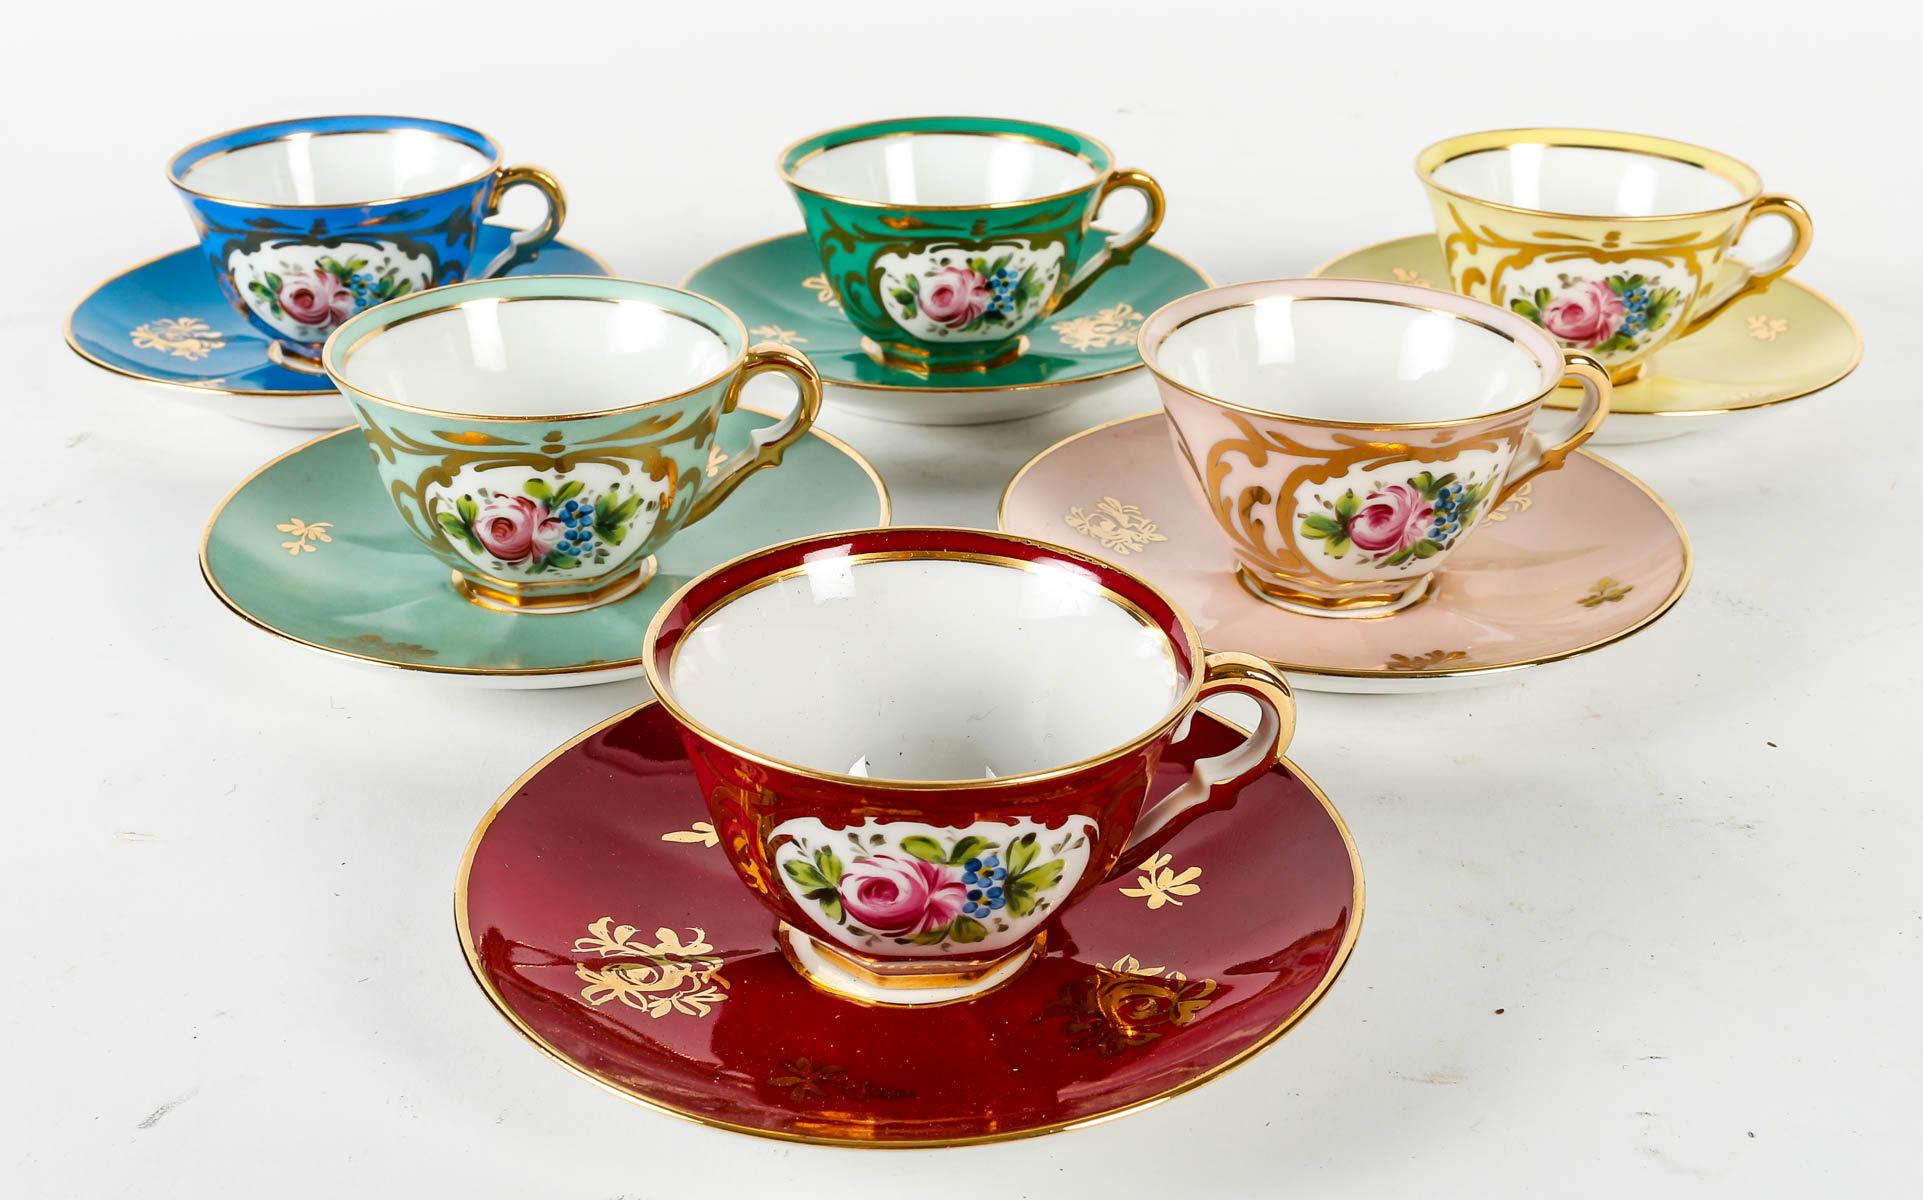 20th Century Limoges Porcelain Coffee Service, Early 20th .